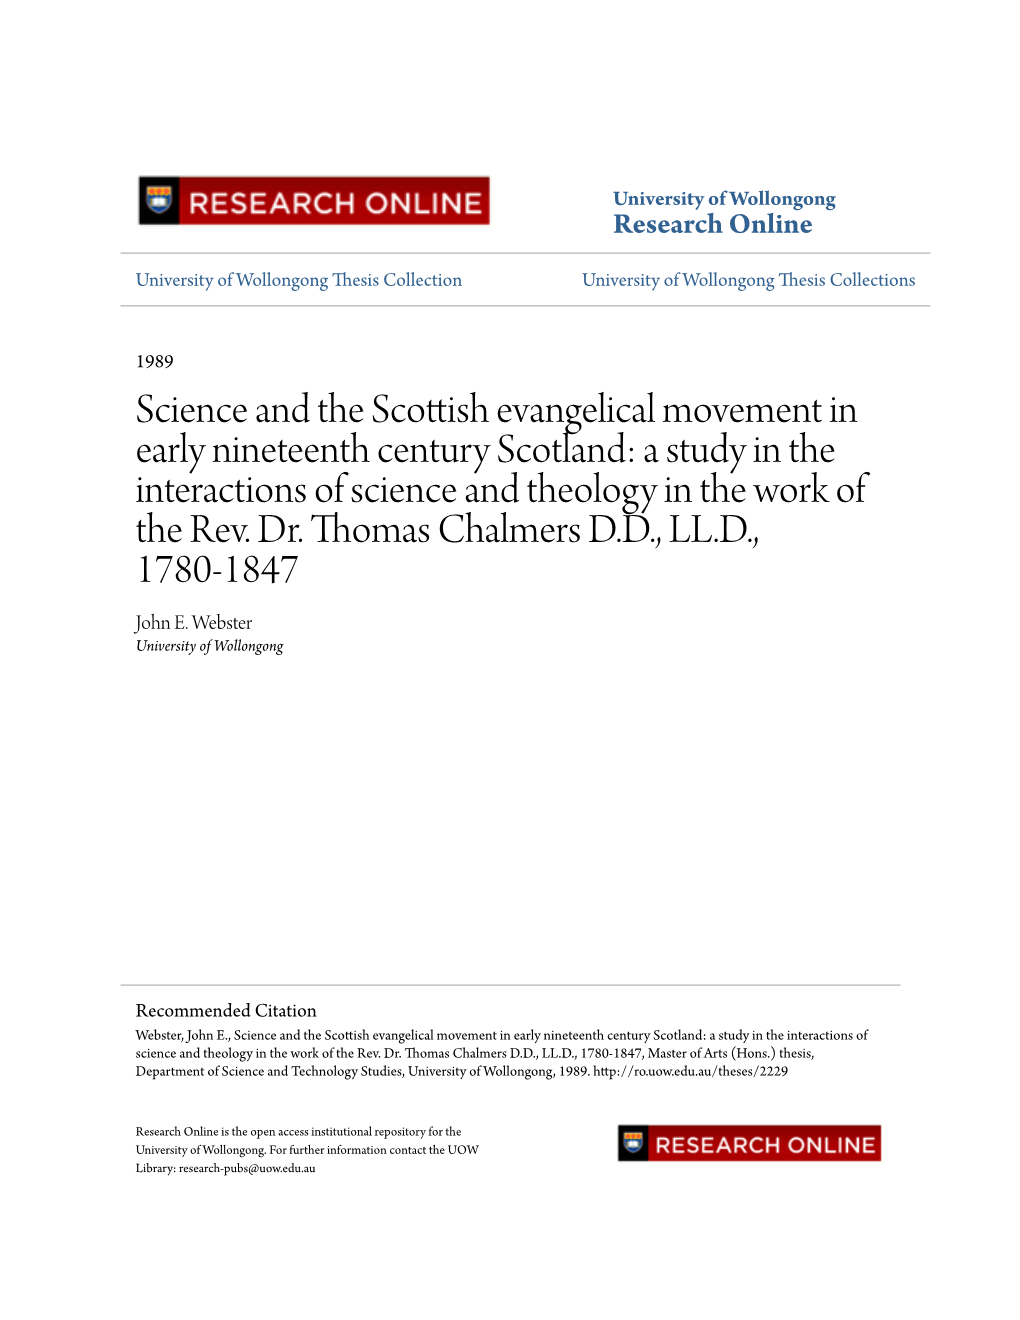 Science and the Scottish Evangelical Movement in Early Nineteenth Century Scotland: a Study in the Interactions of Science and Theology in the Work of the Rev